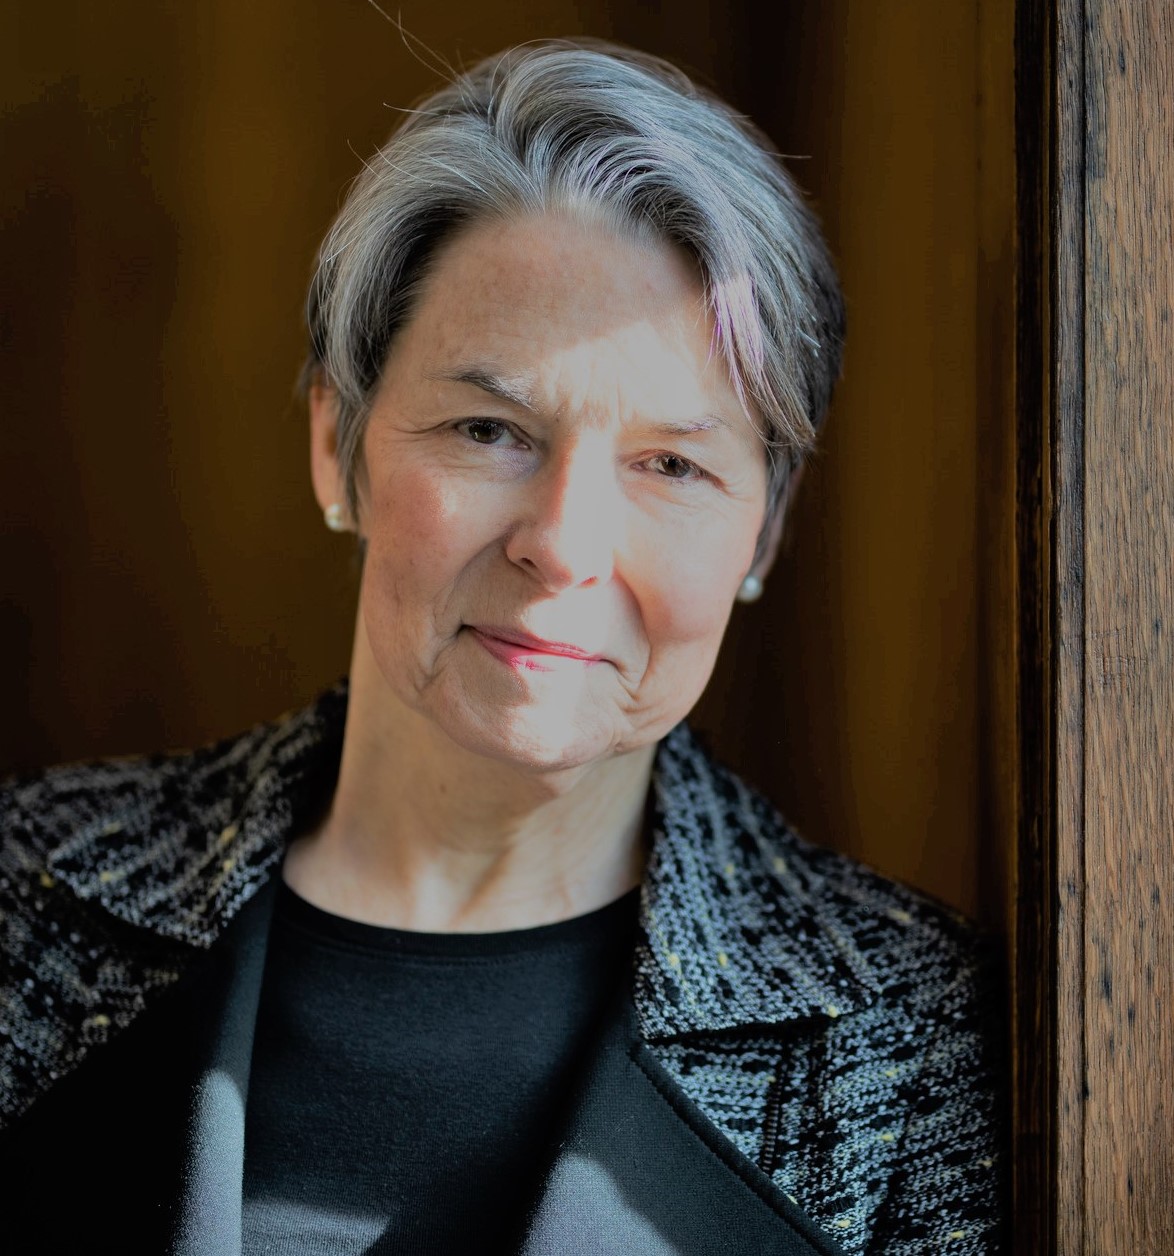 Dame Sarah Worthington in discussion with Trinity in Japan on Friday 26 February 2021 at 6pm